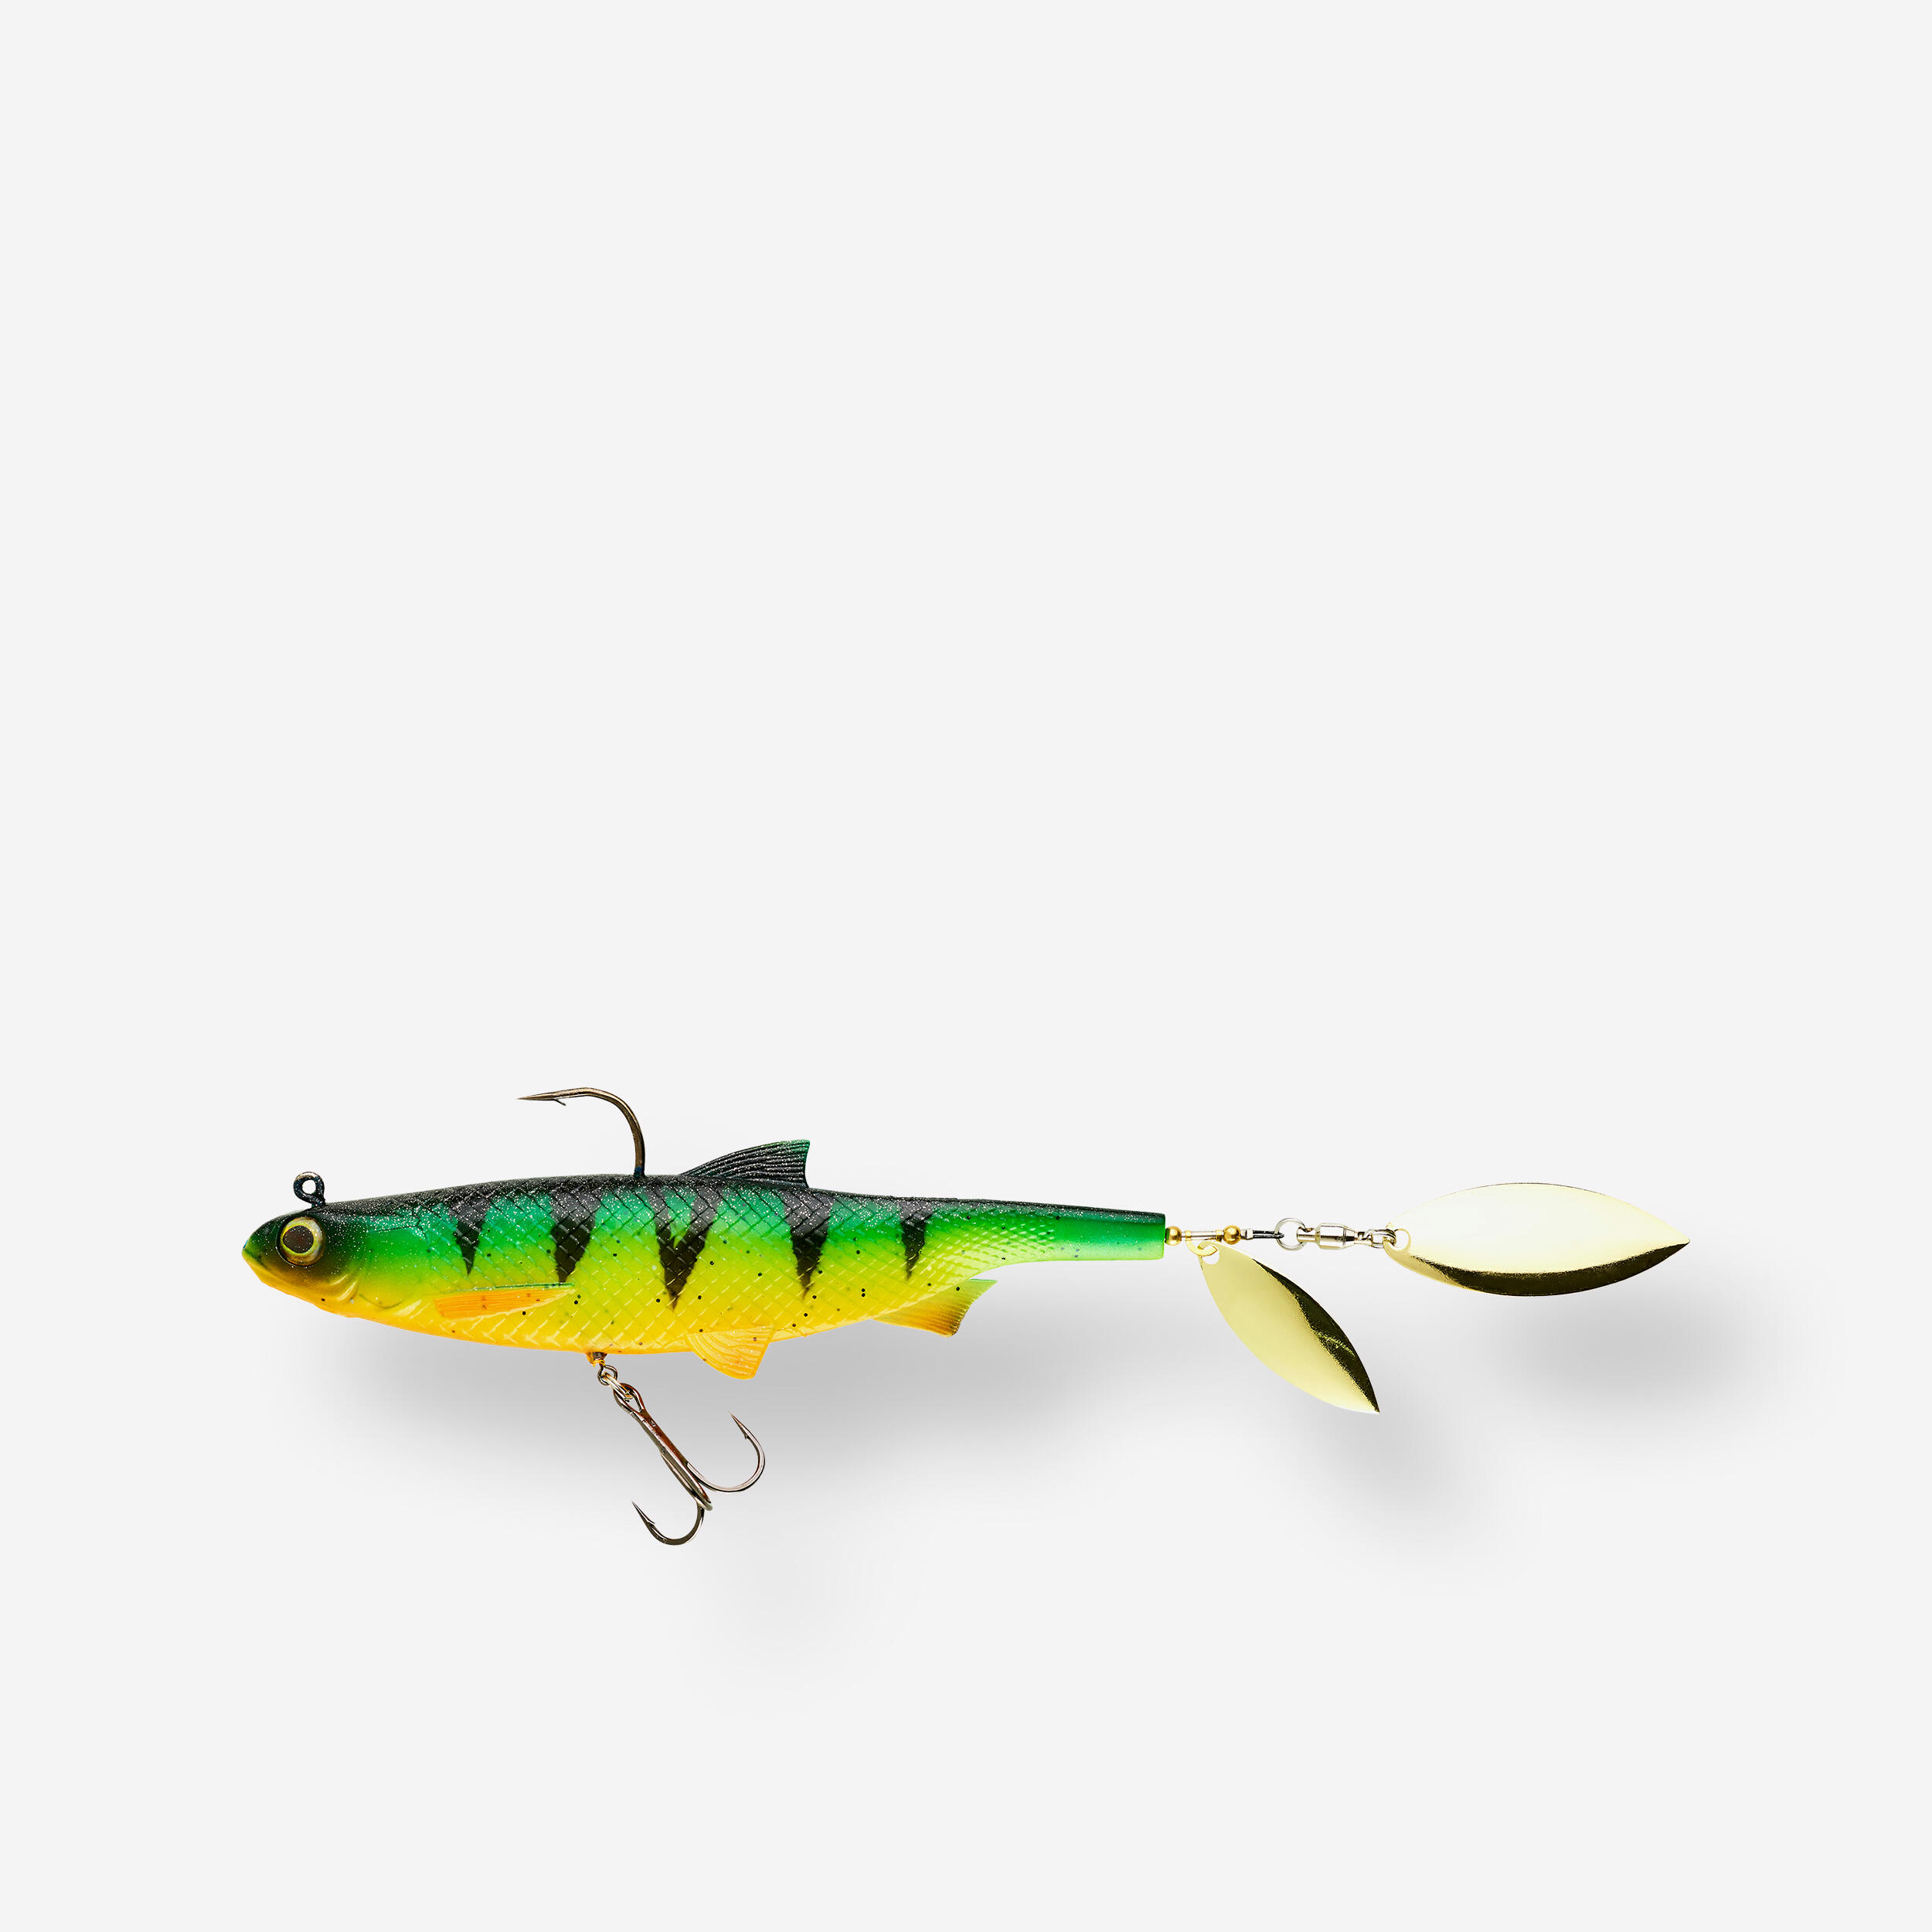 LURE FISHING ROACHSPIN 150 FIRETIGER BLADED SHAD SOFT LURE 1/2